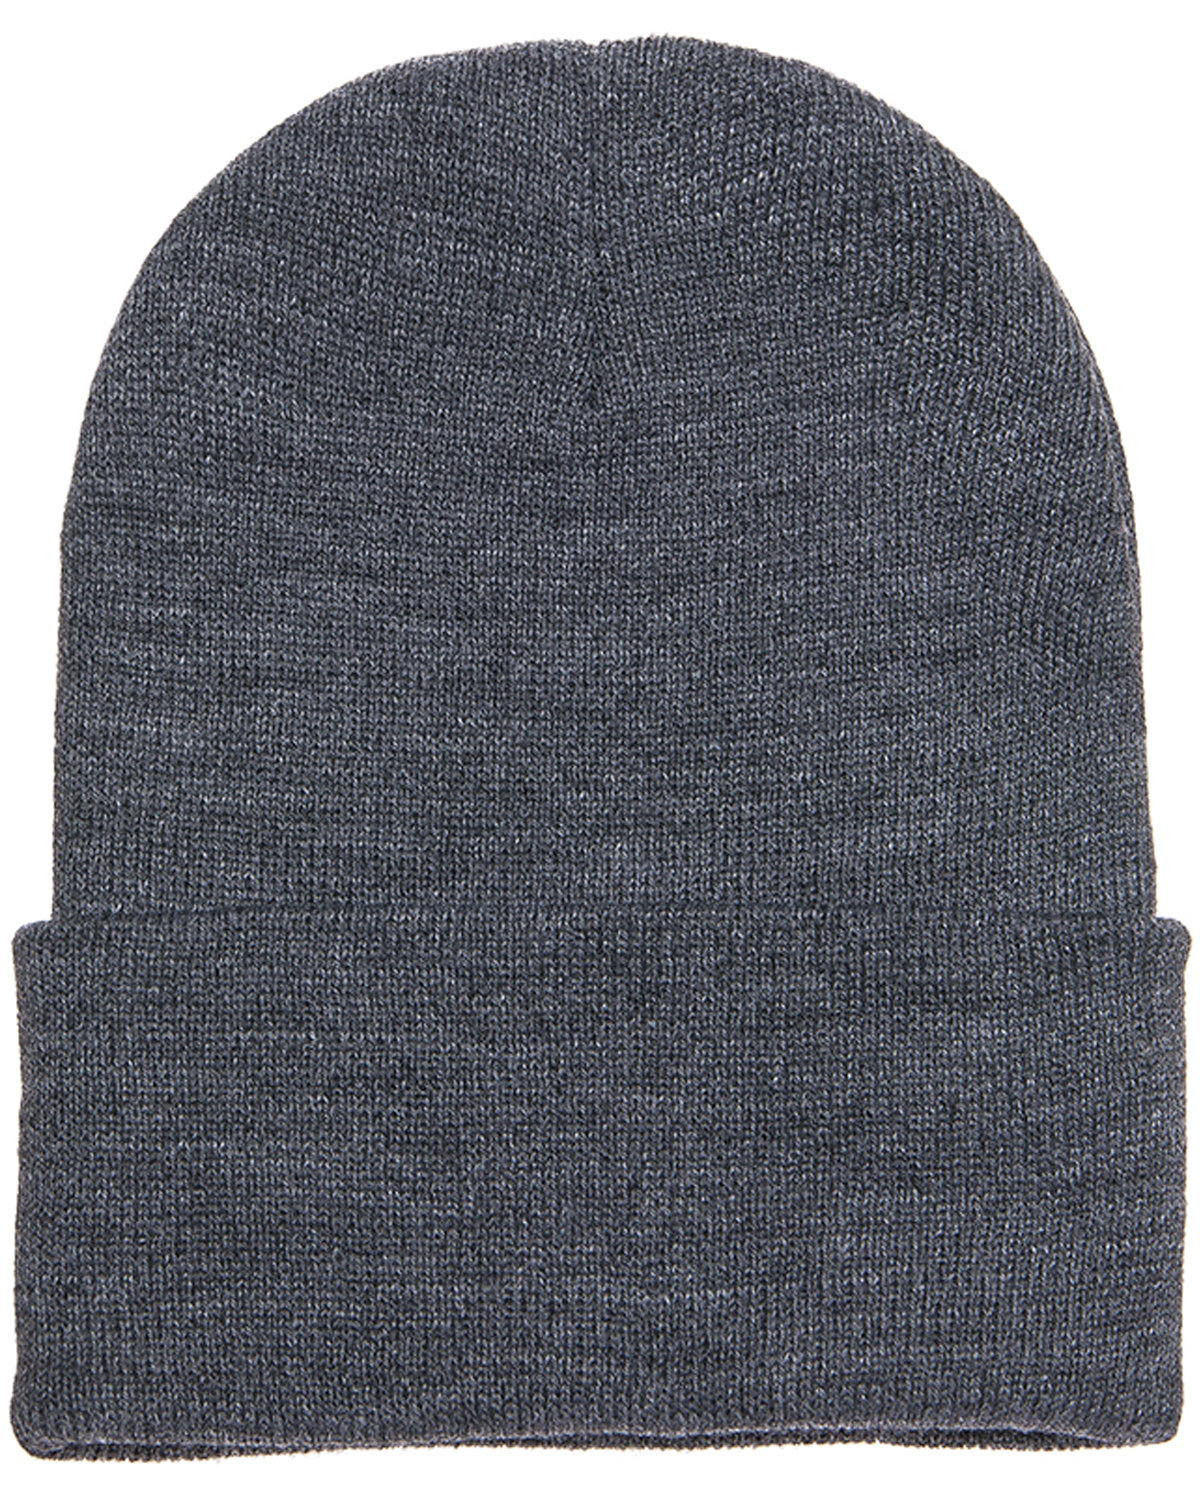 Cuffed Knit alphabroder Beanie Adult Yupoong |